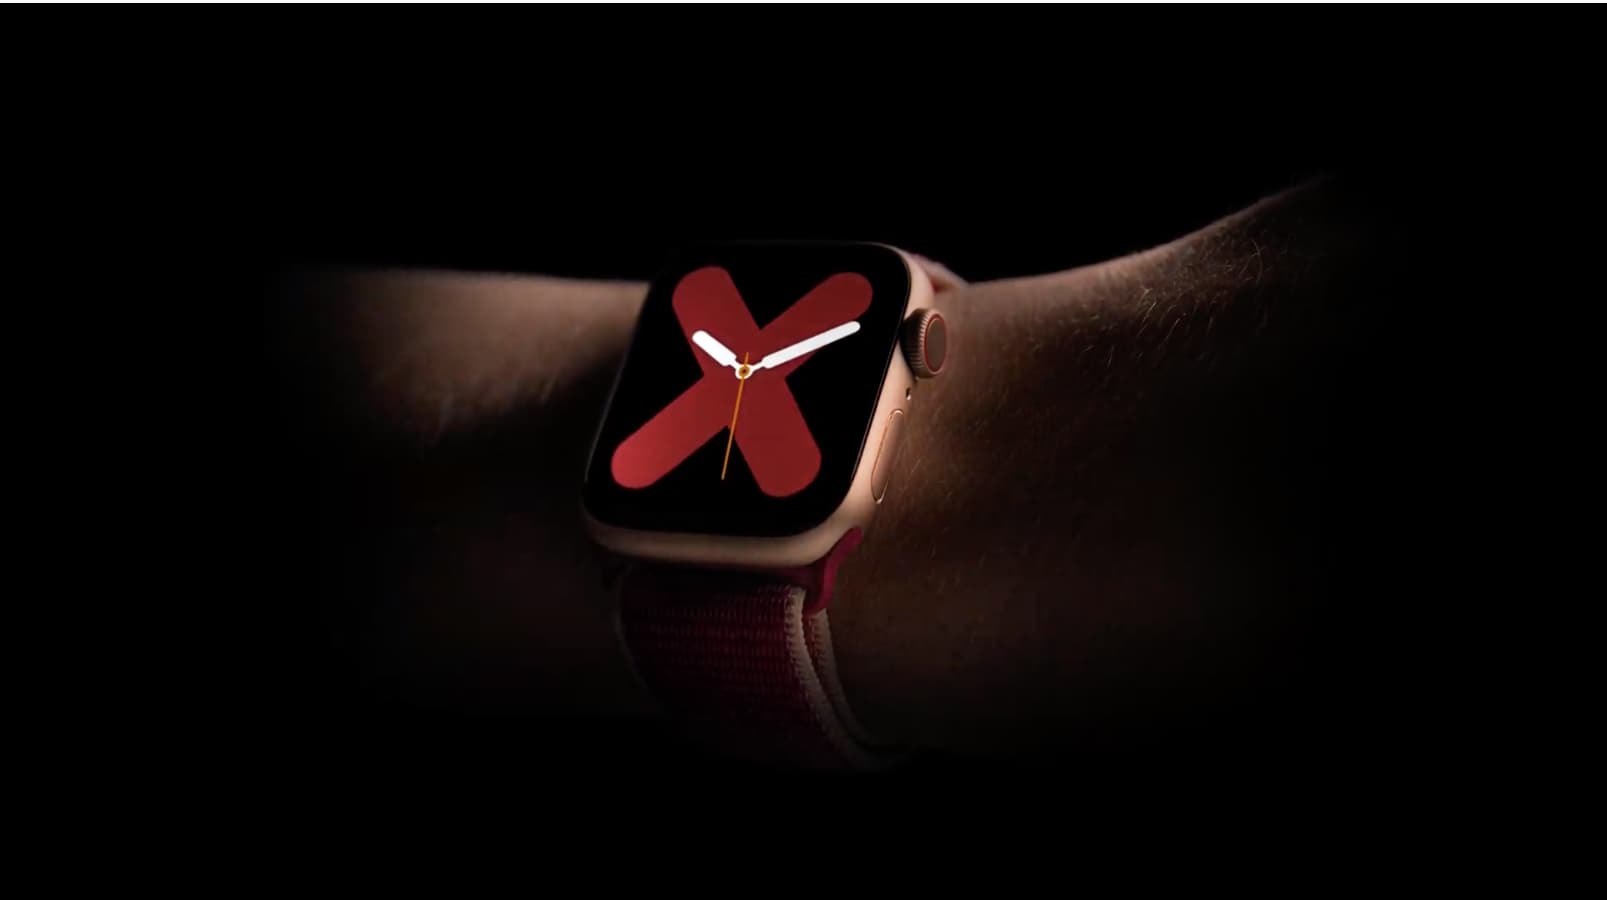 The Apple Watch Series 5 with an always-on display